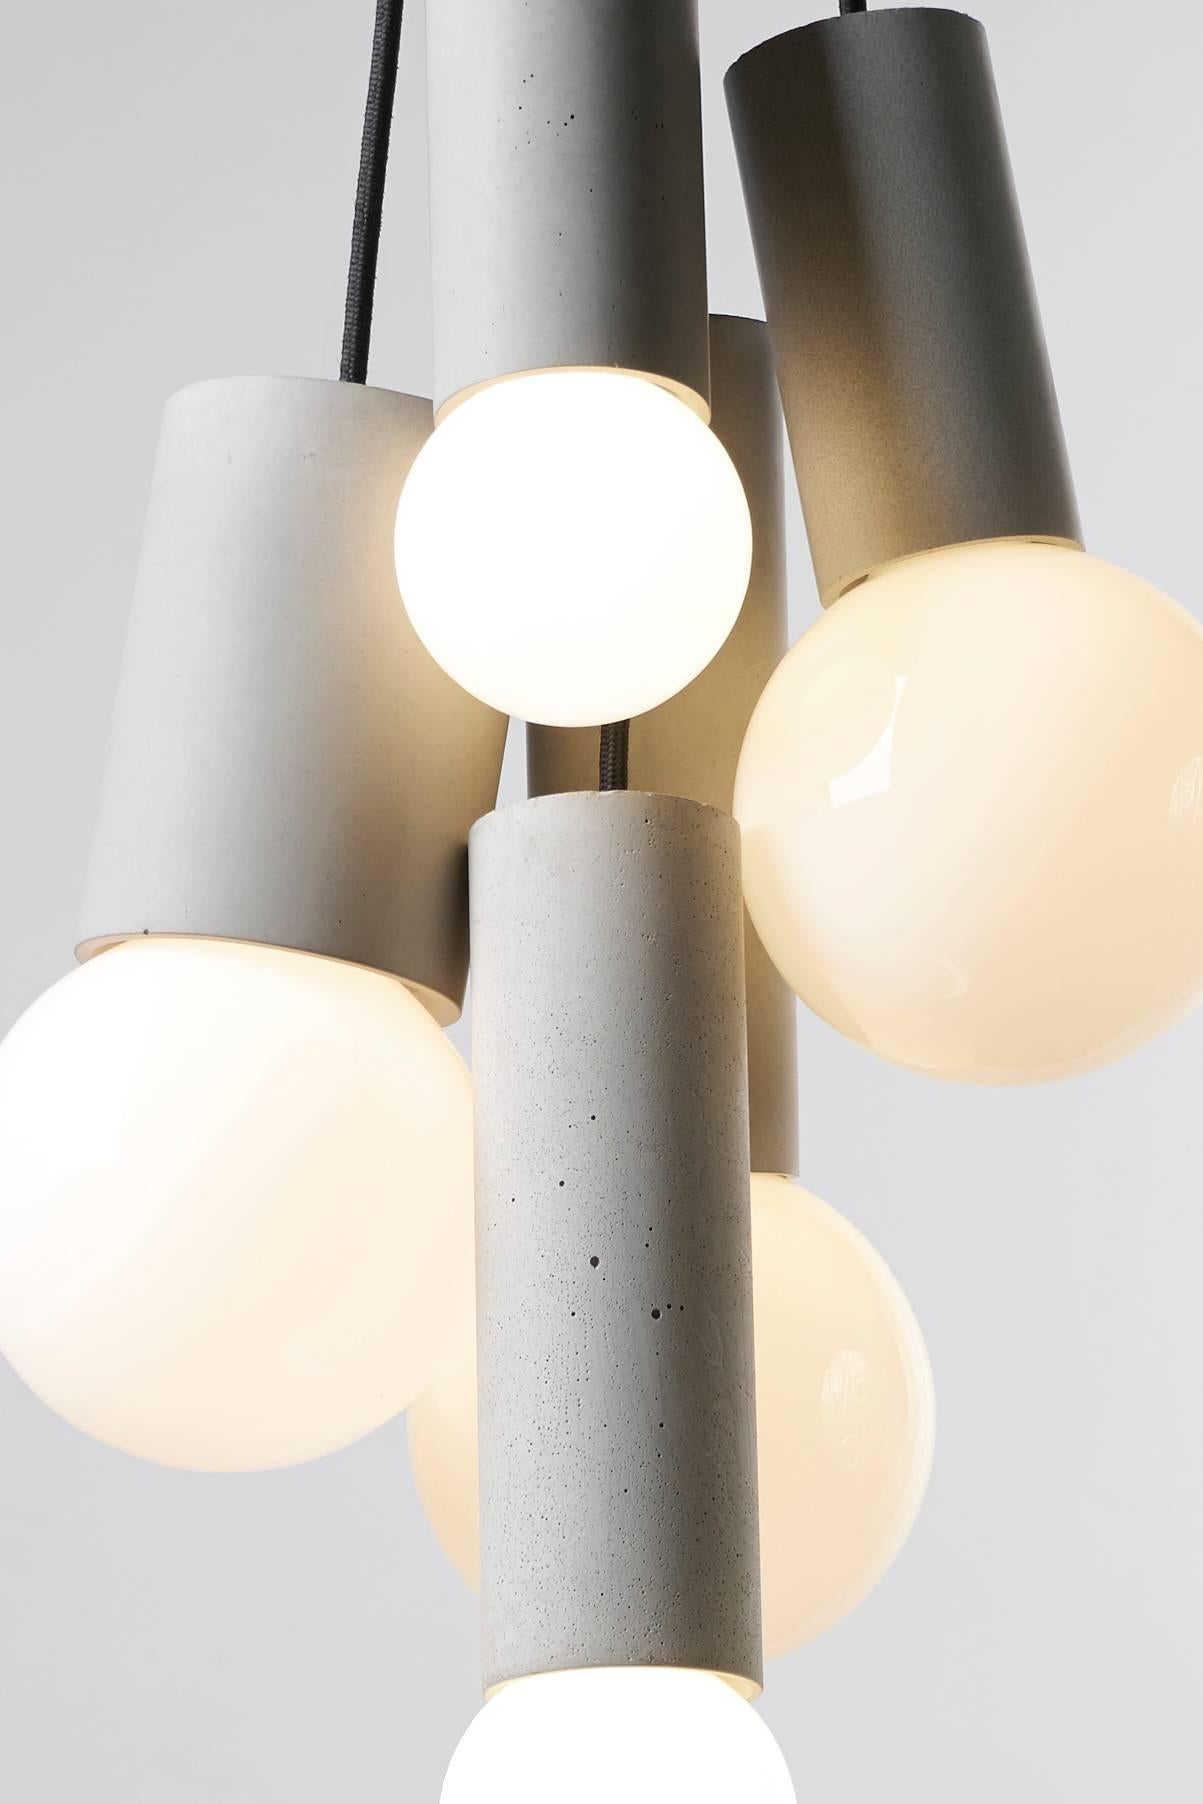 Chinese Ball 1, Concrete Ceiling Lamp by Bentu Design